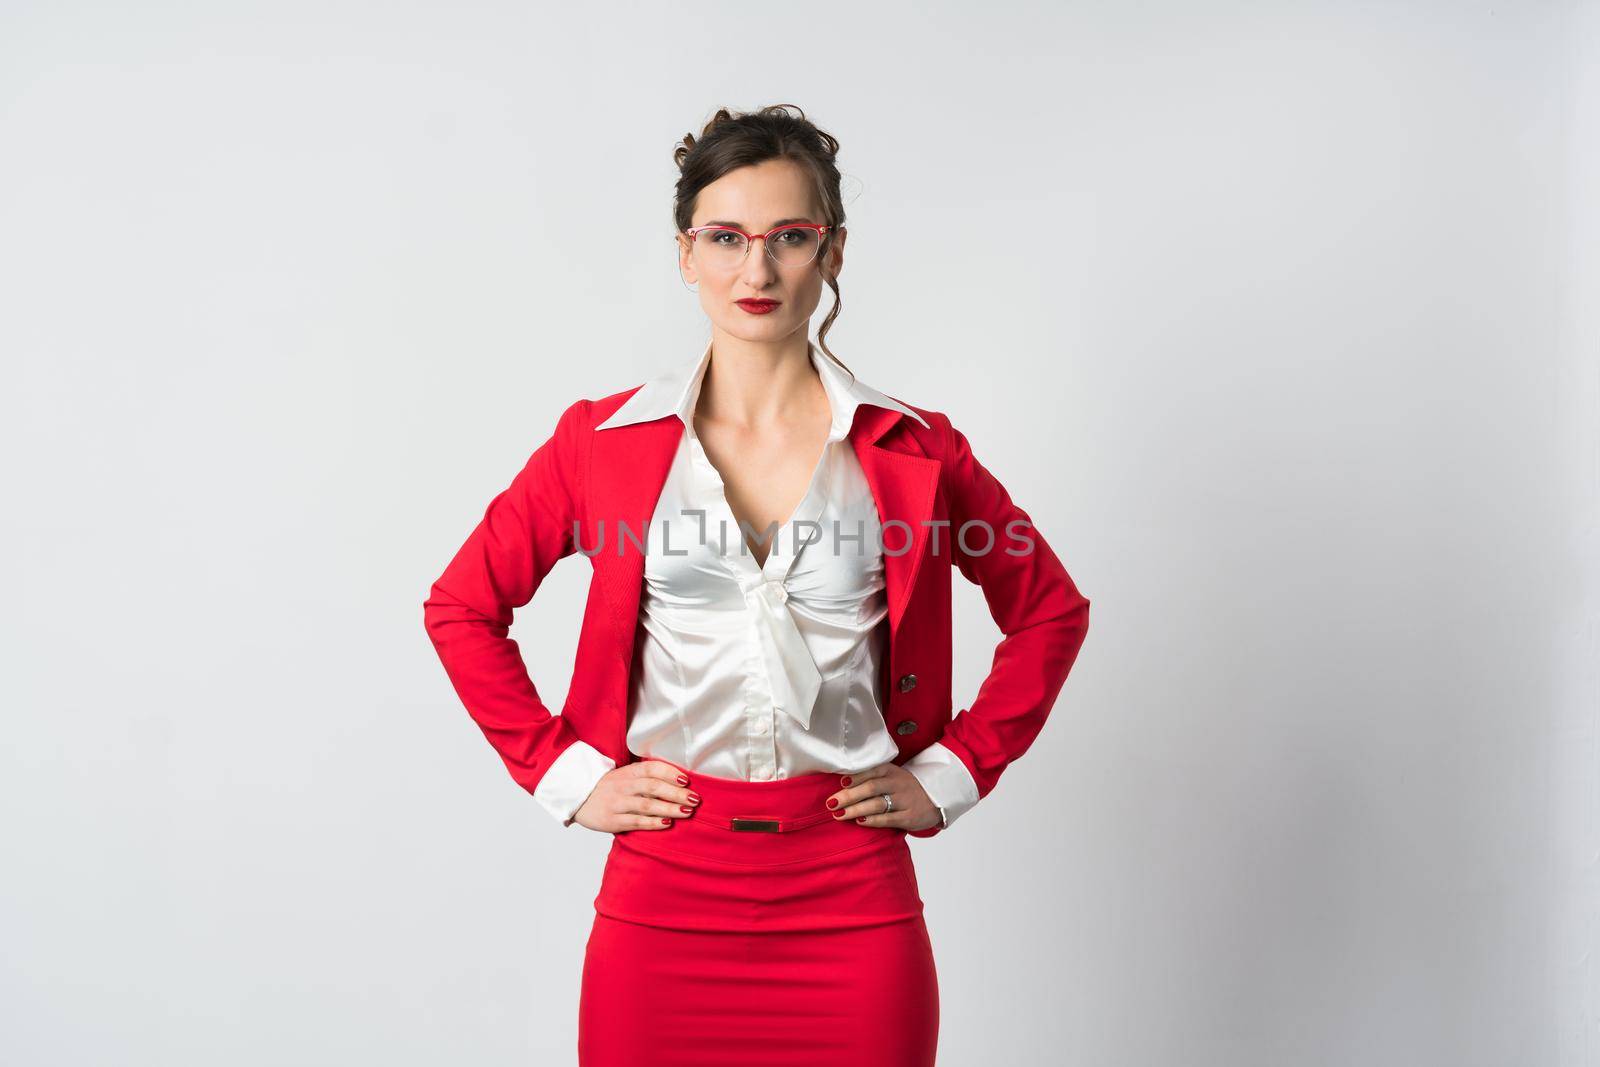 Businesswoman in aggressive stance looking at the camera